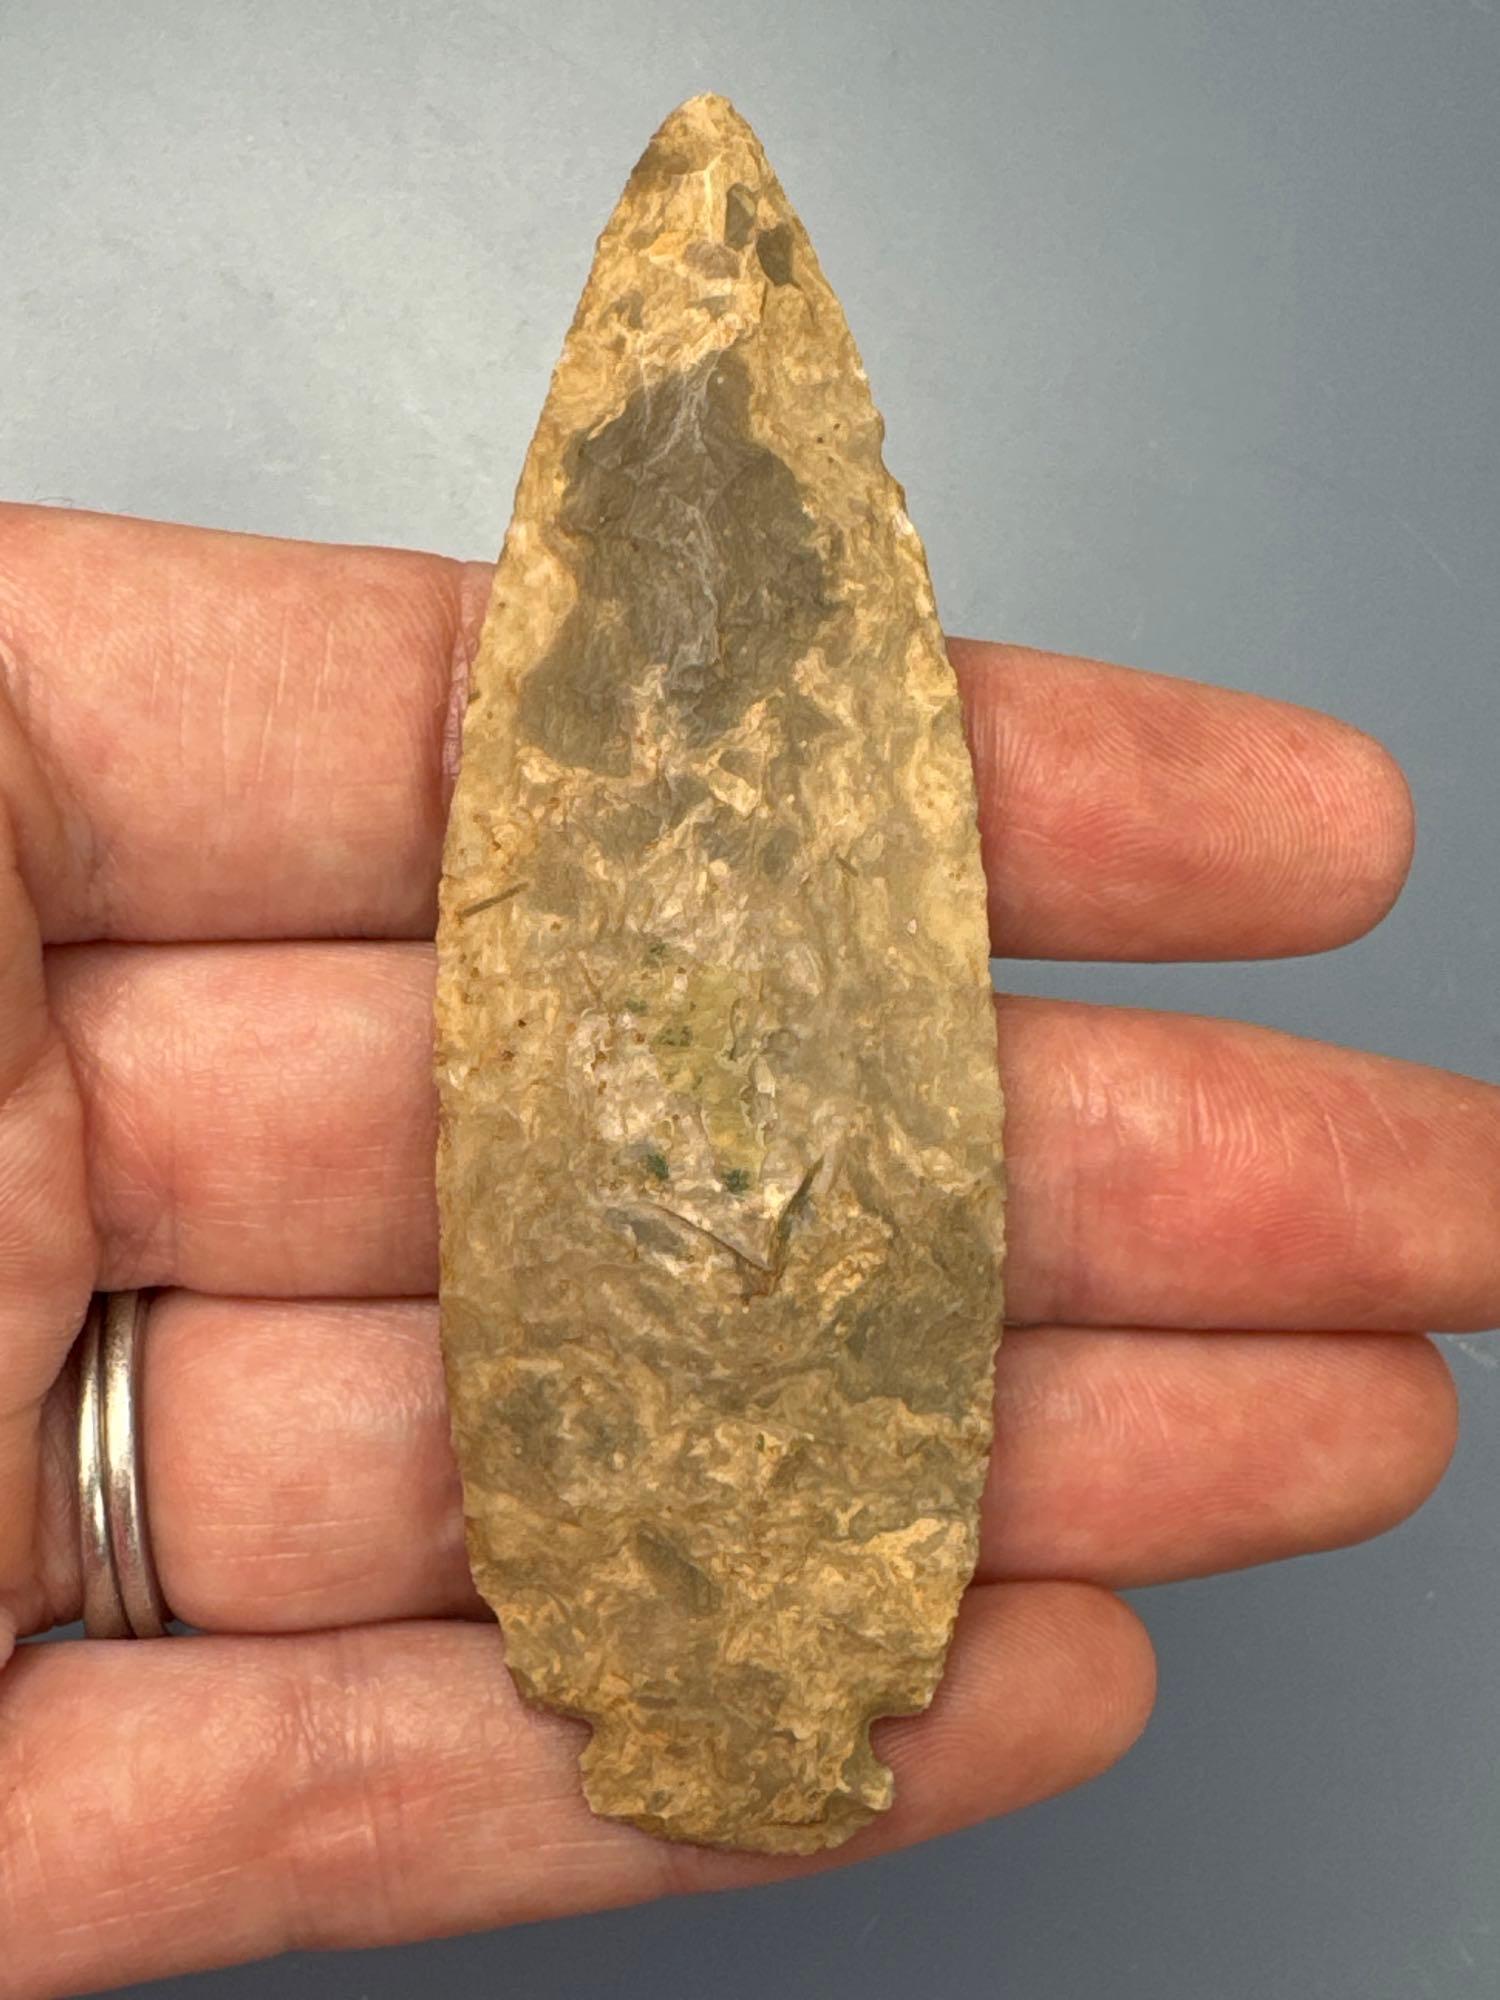 RARE 3 3/8" Patinated Onondaga Chert Dovetail Point, Found in Western, NY, Ex: Marrissey of Whitney